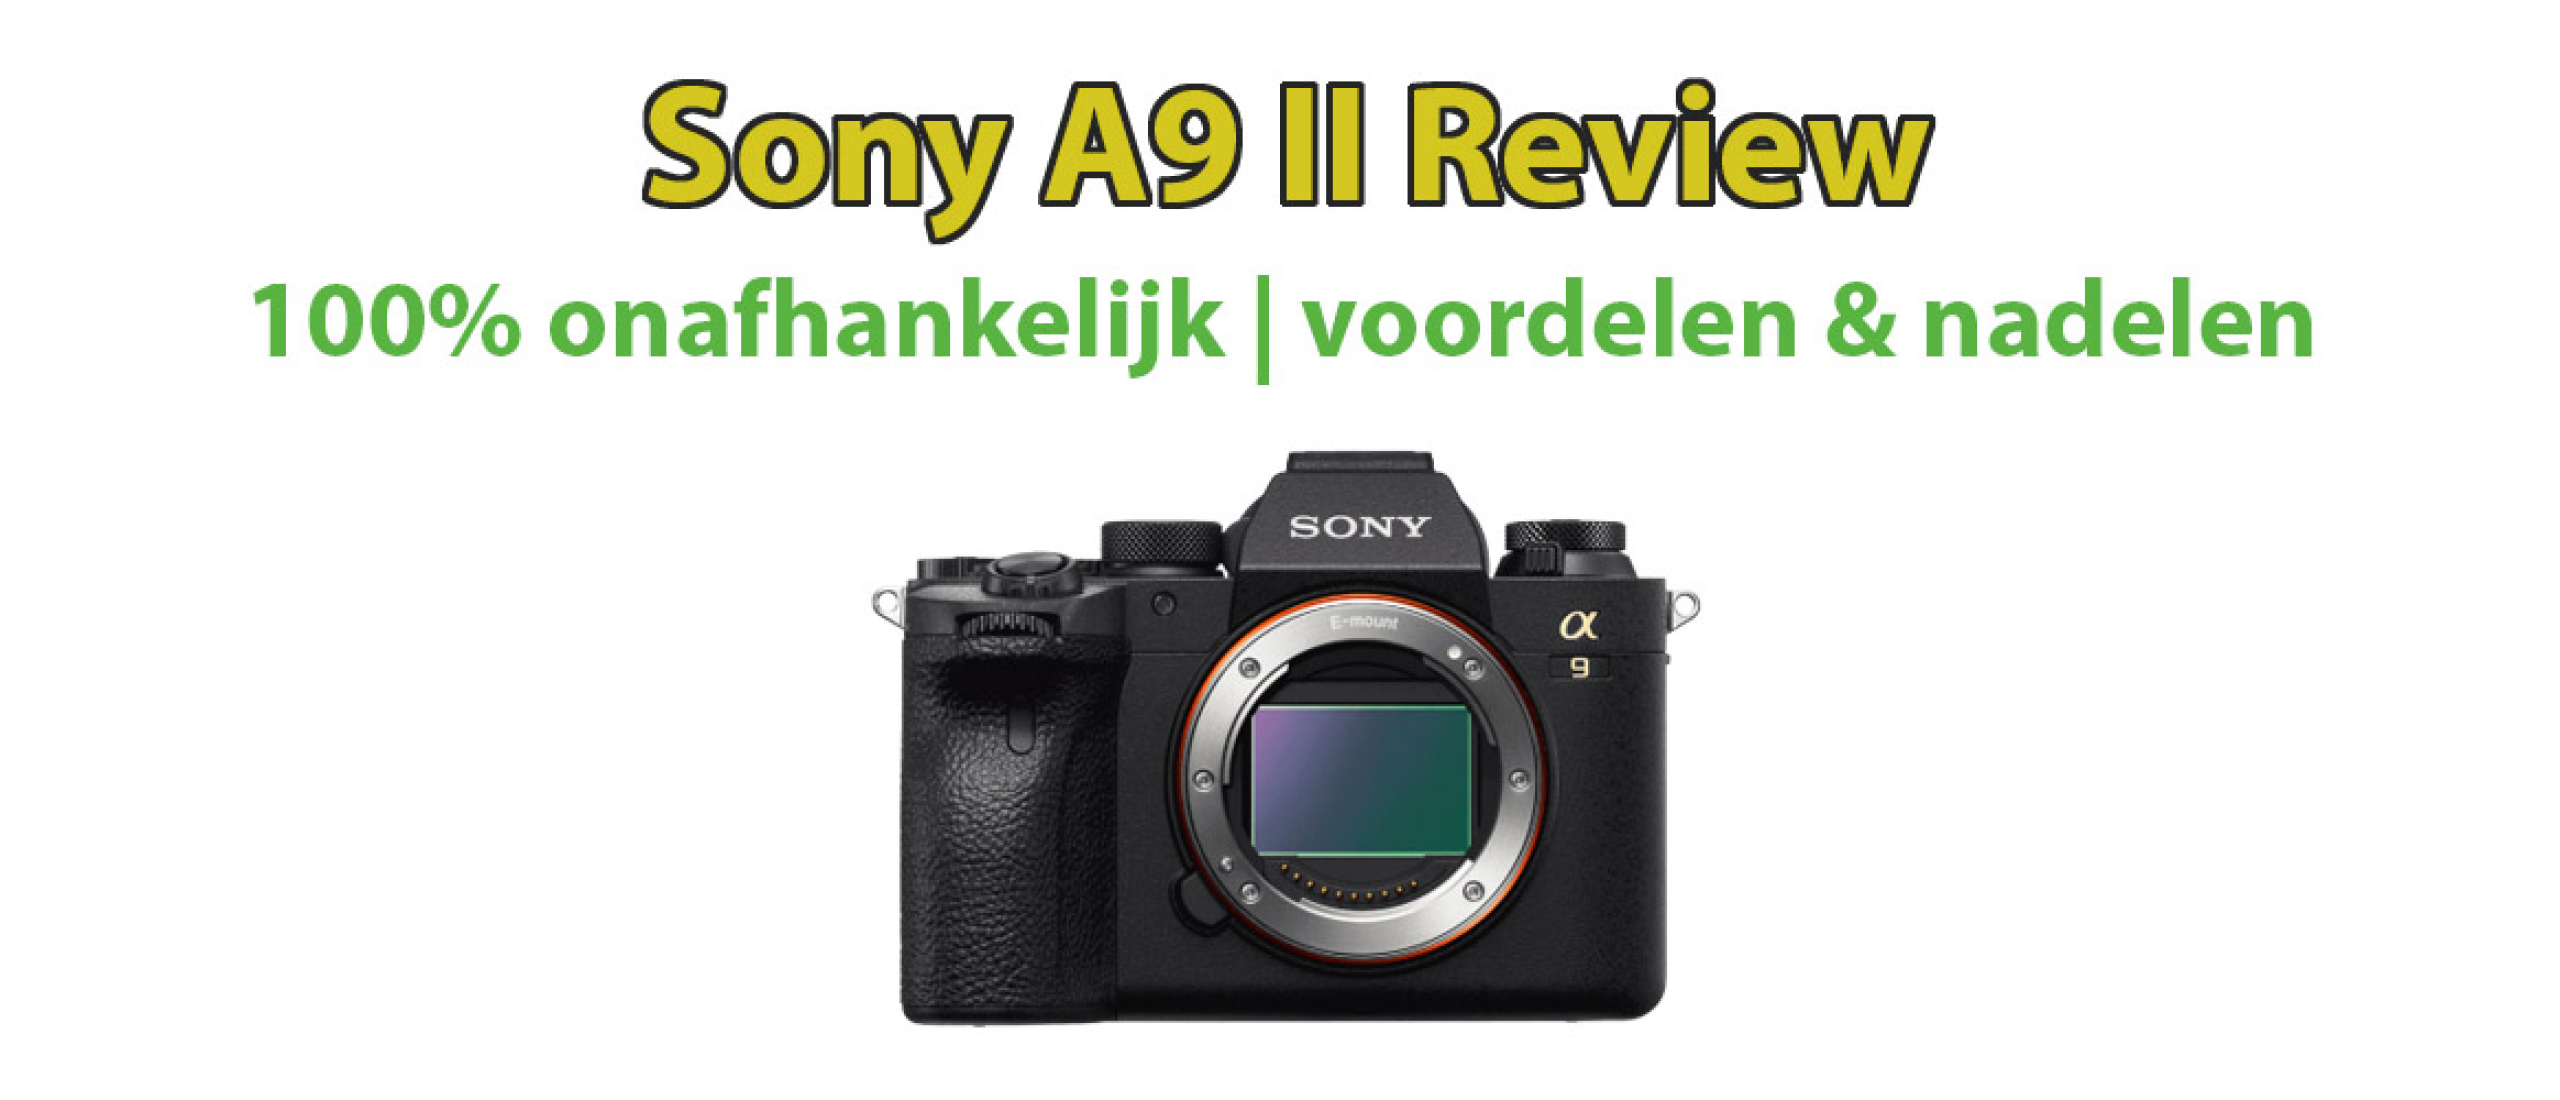 Sony A9 II Review